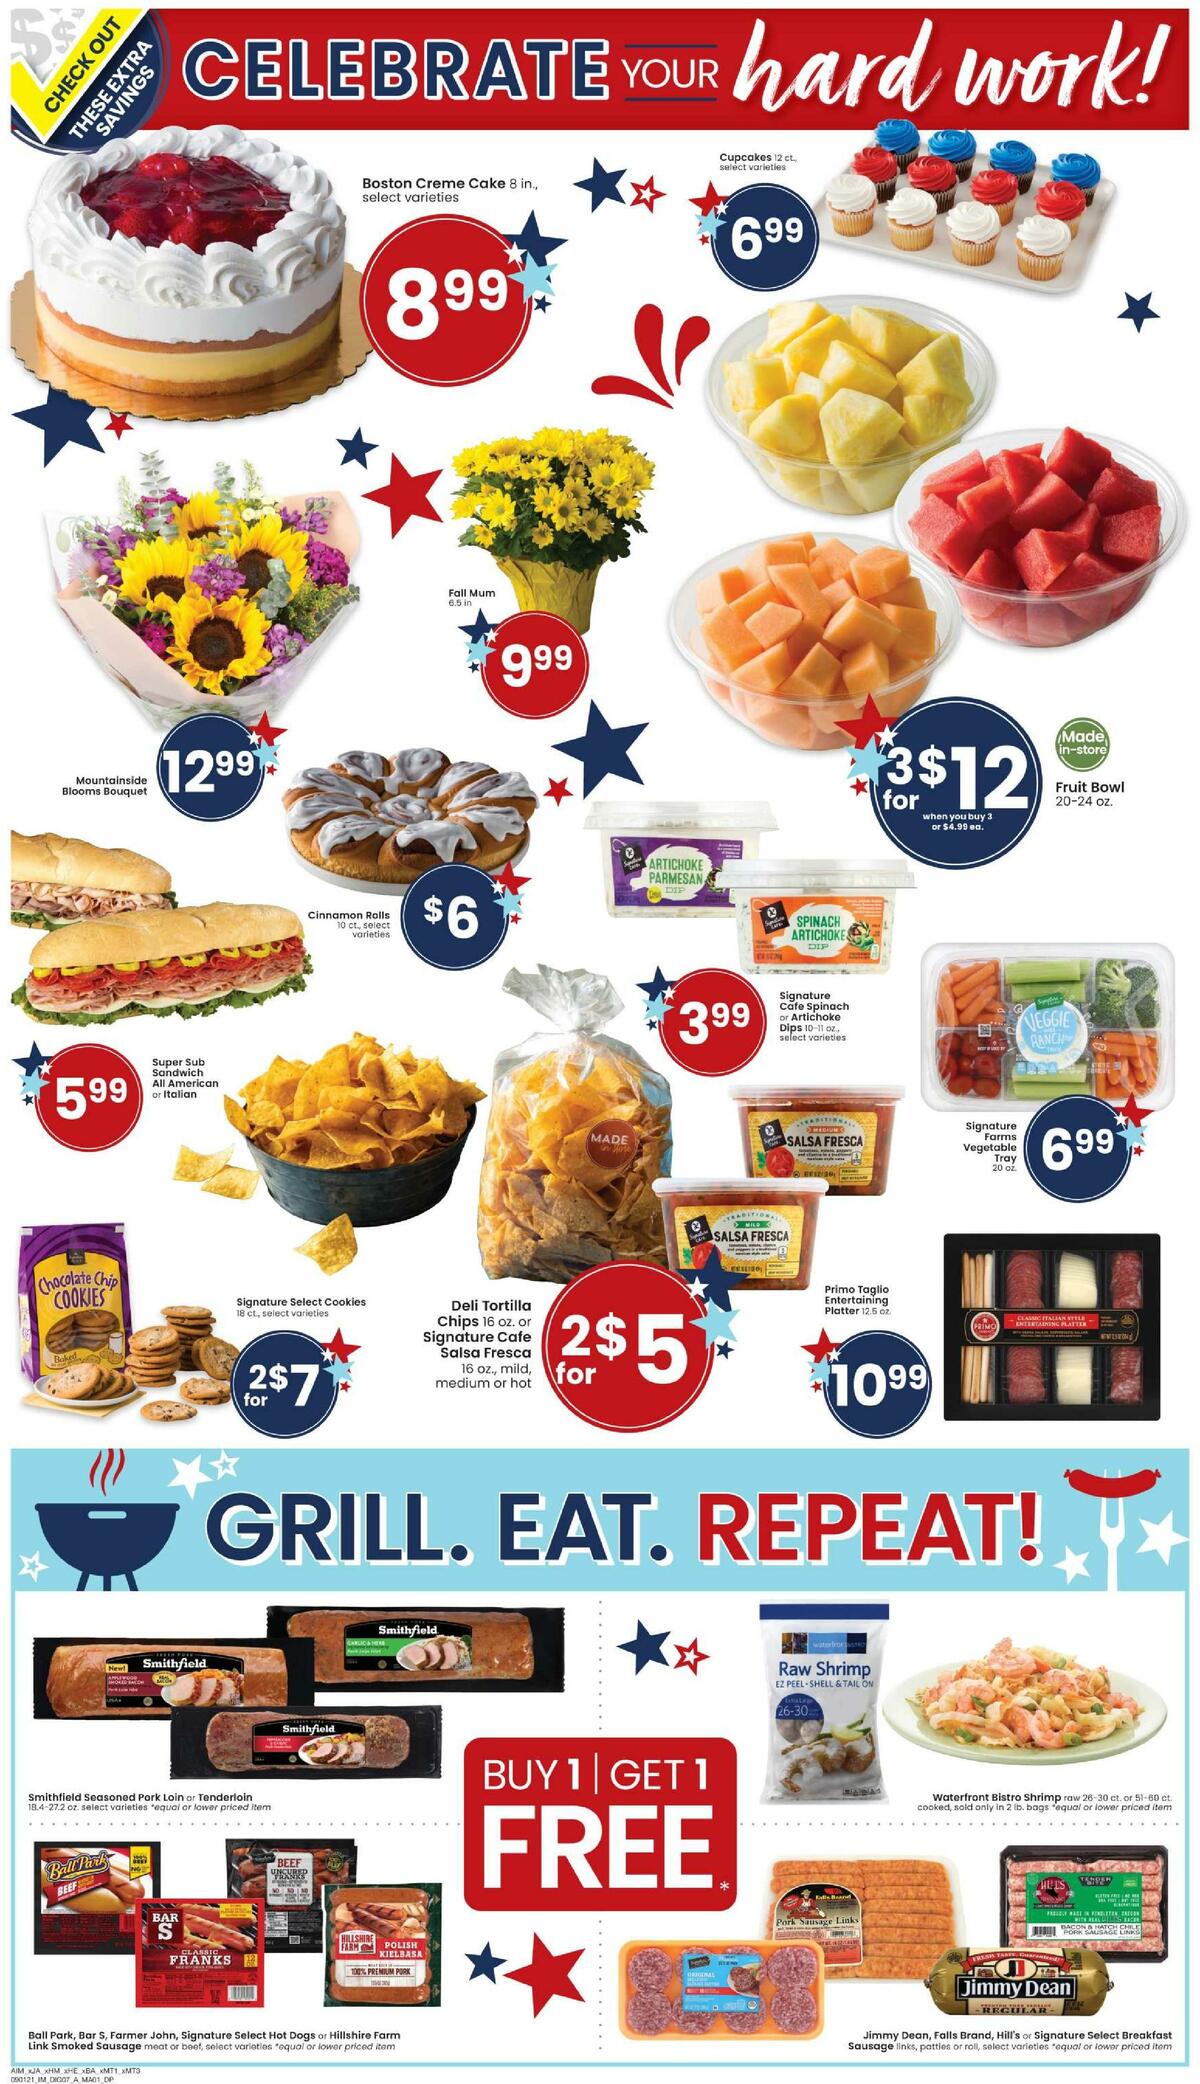 Albertsons Weekly Ad from September 1